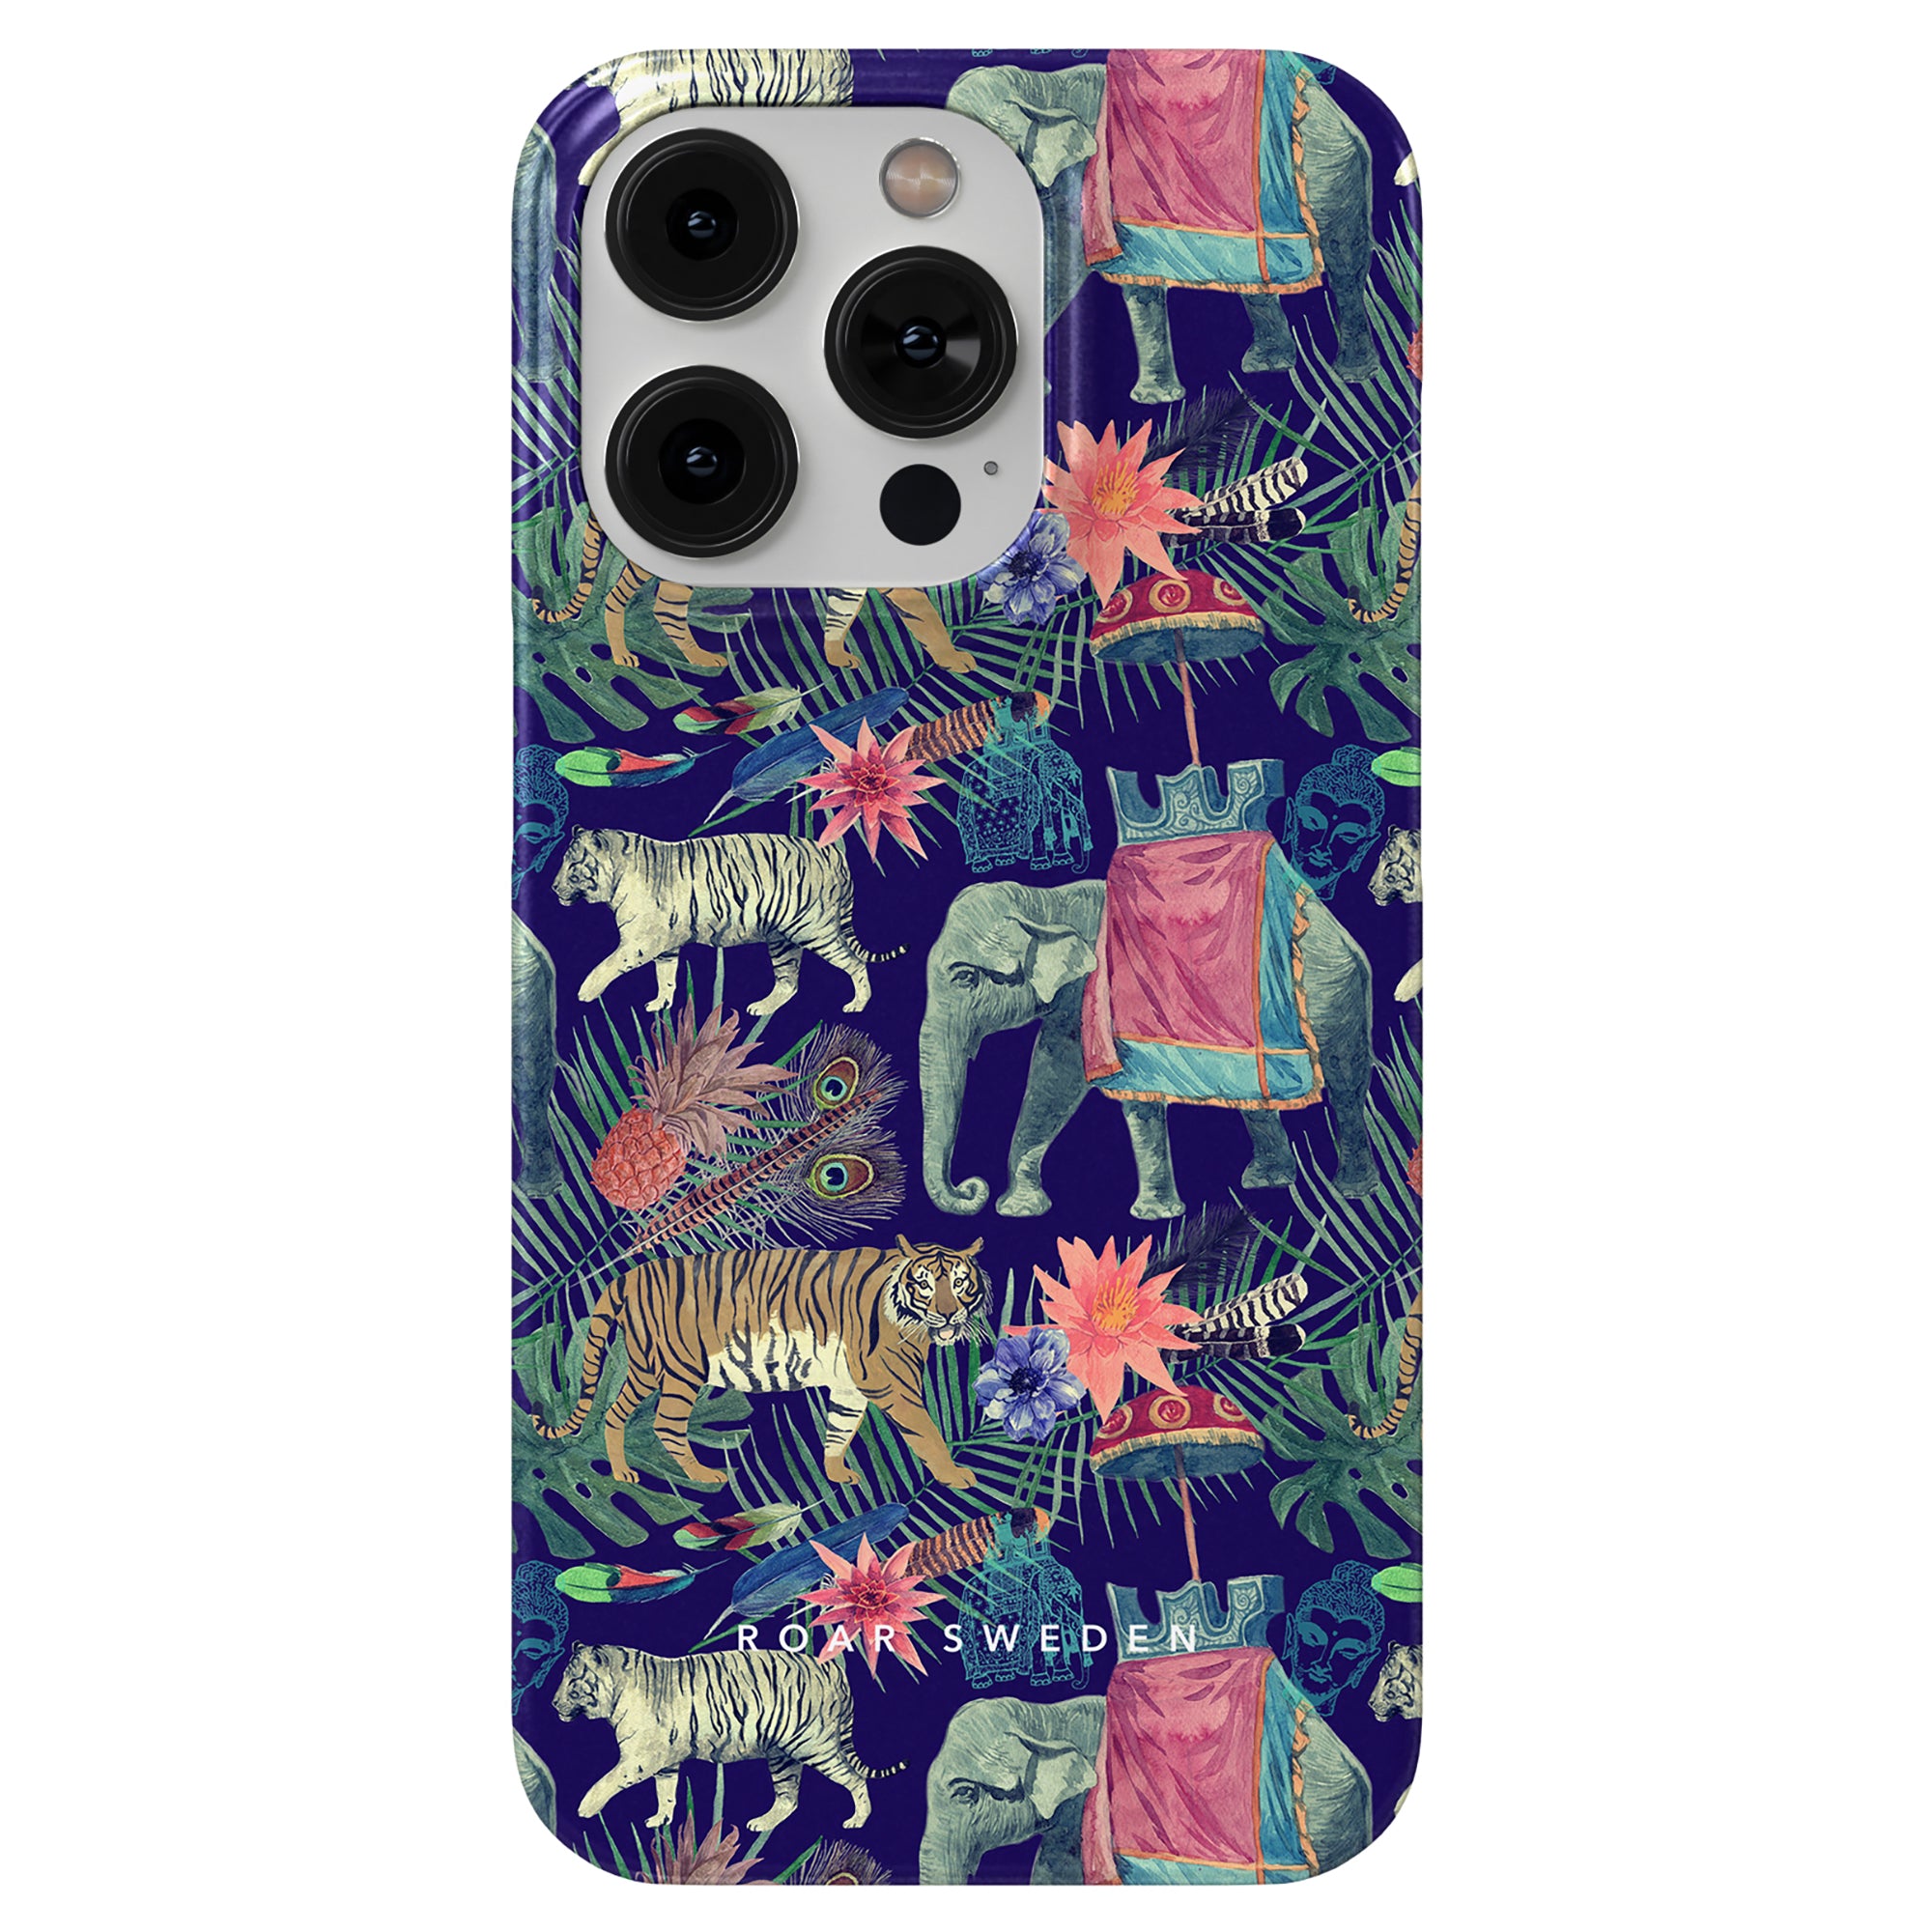 A Bombay slim smartphone case with a blue tiger and flowers on it.